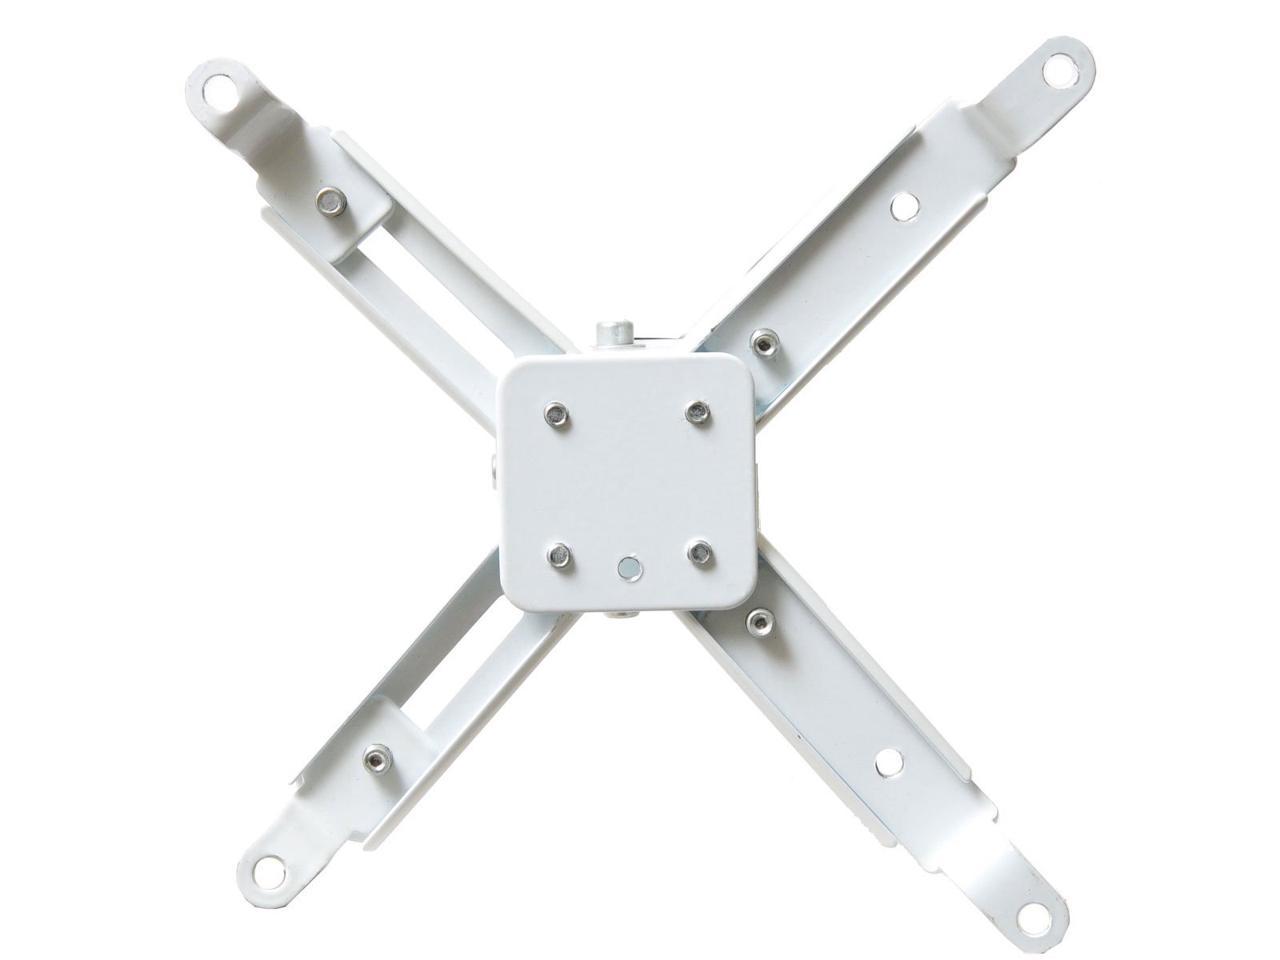 VideoSecu Universal LCD DLP Projector Ceiling Mount fits Any Ceilings with 4 Extension Adaptors PJ2BE55 1YF 